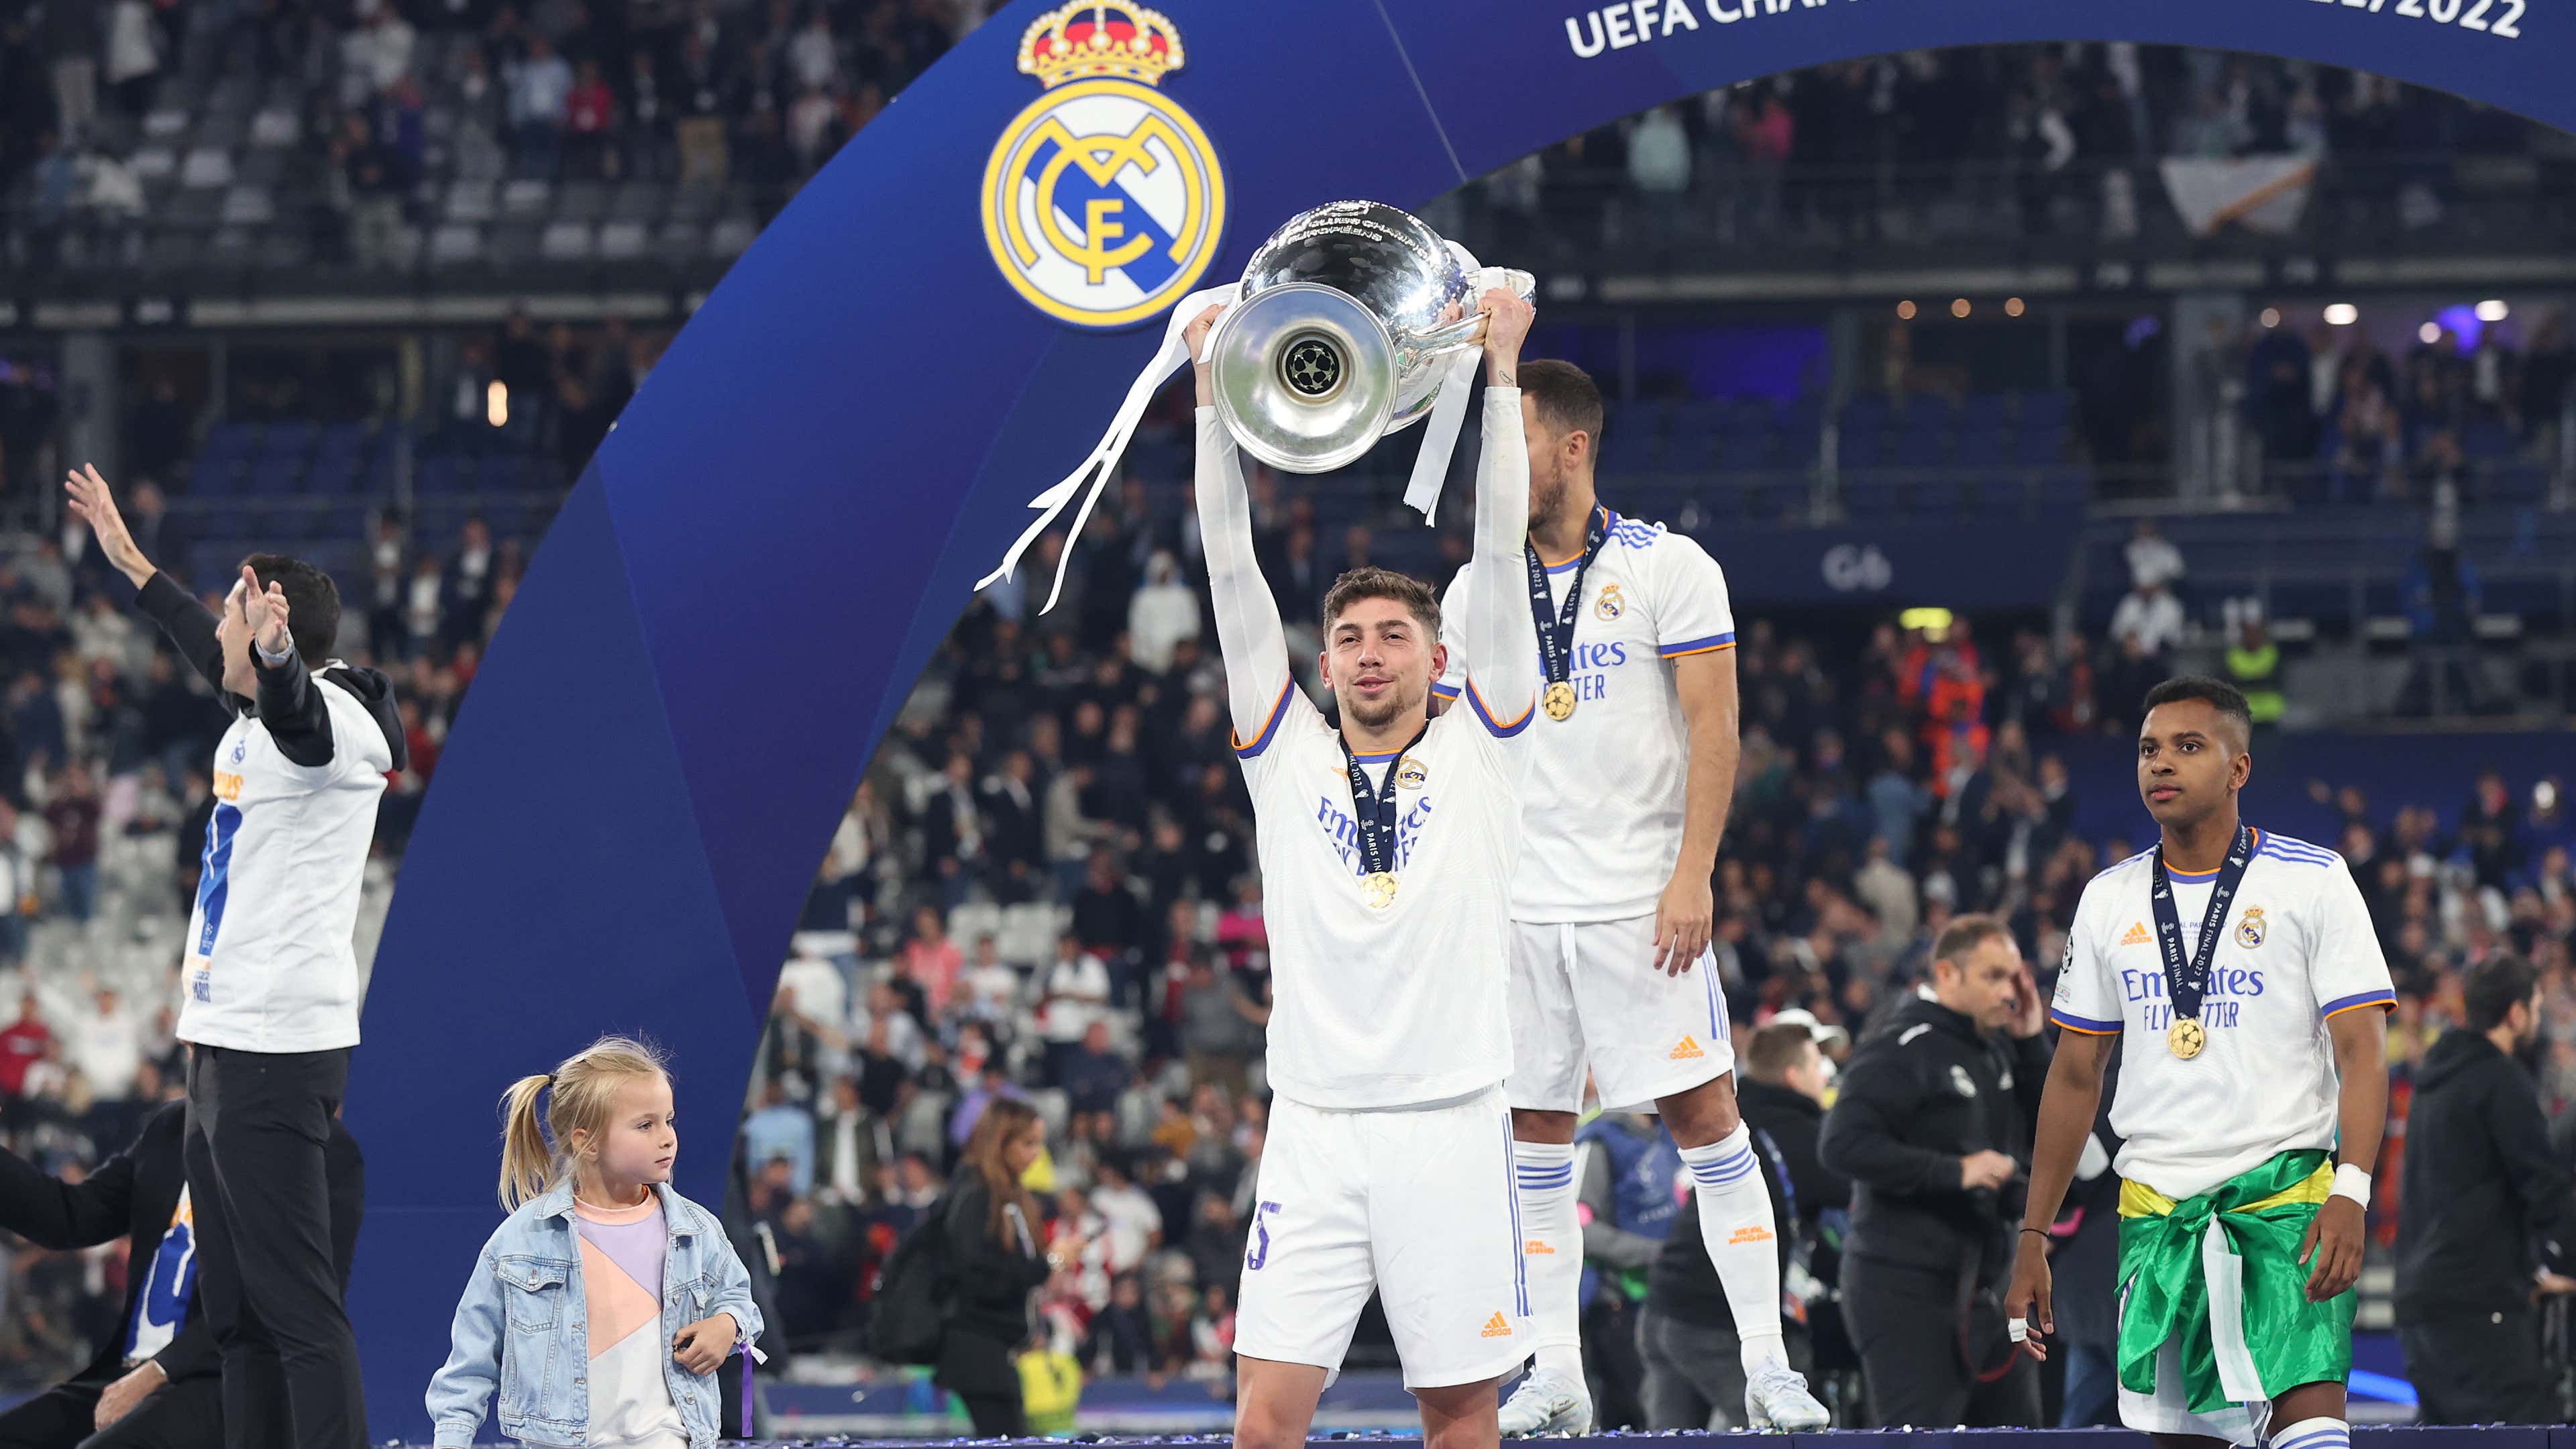 Federico Valverde Real Madrid Champions League trophy 2021-22